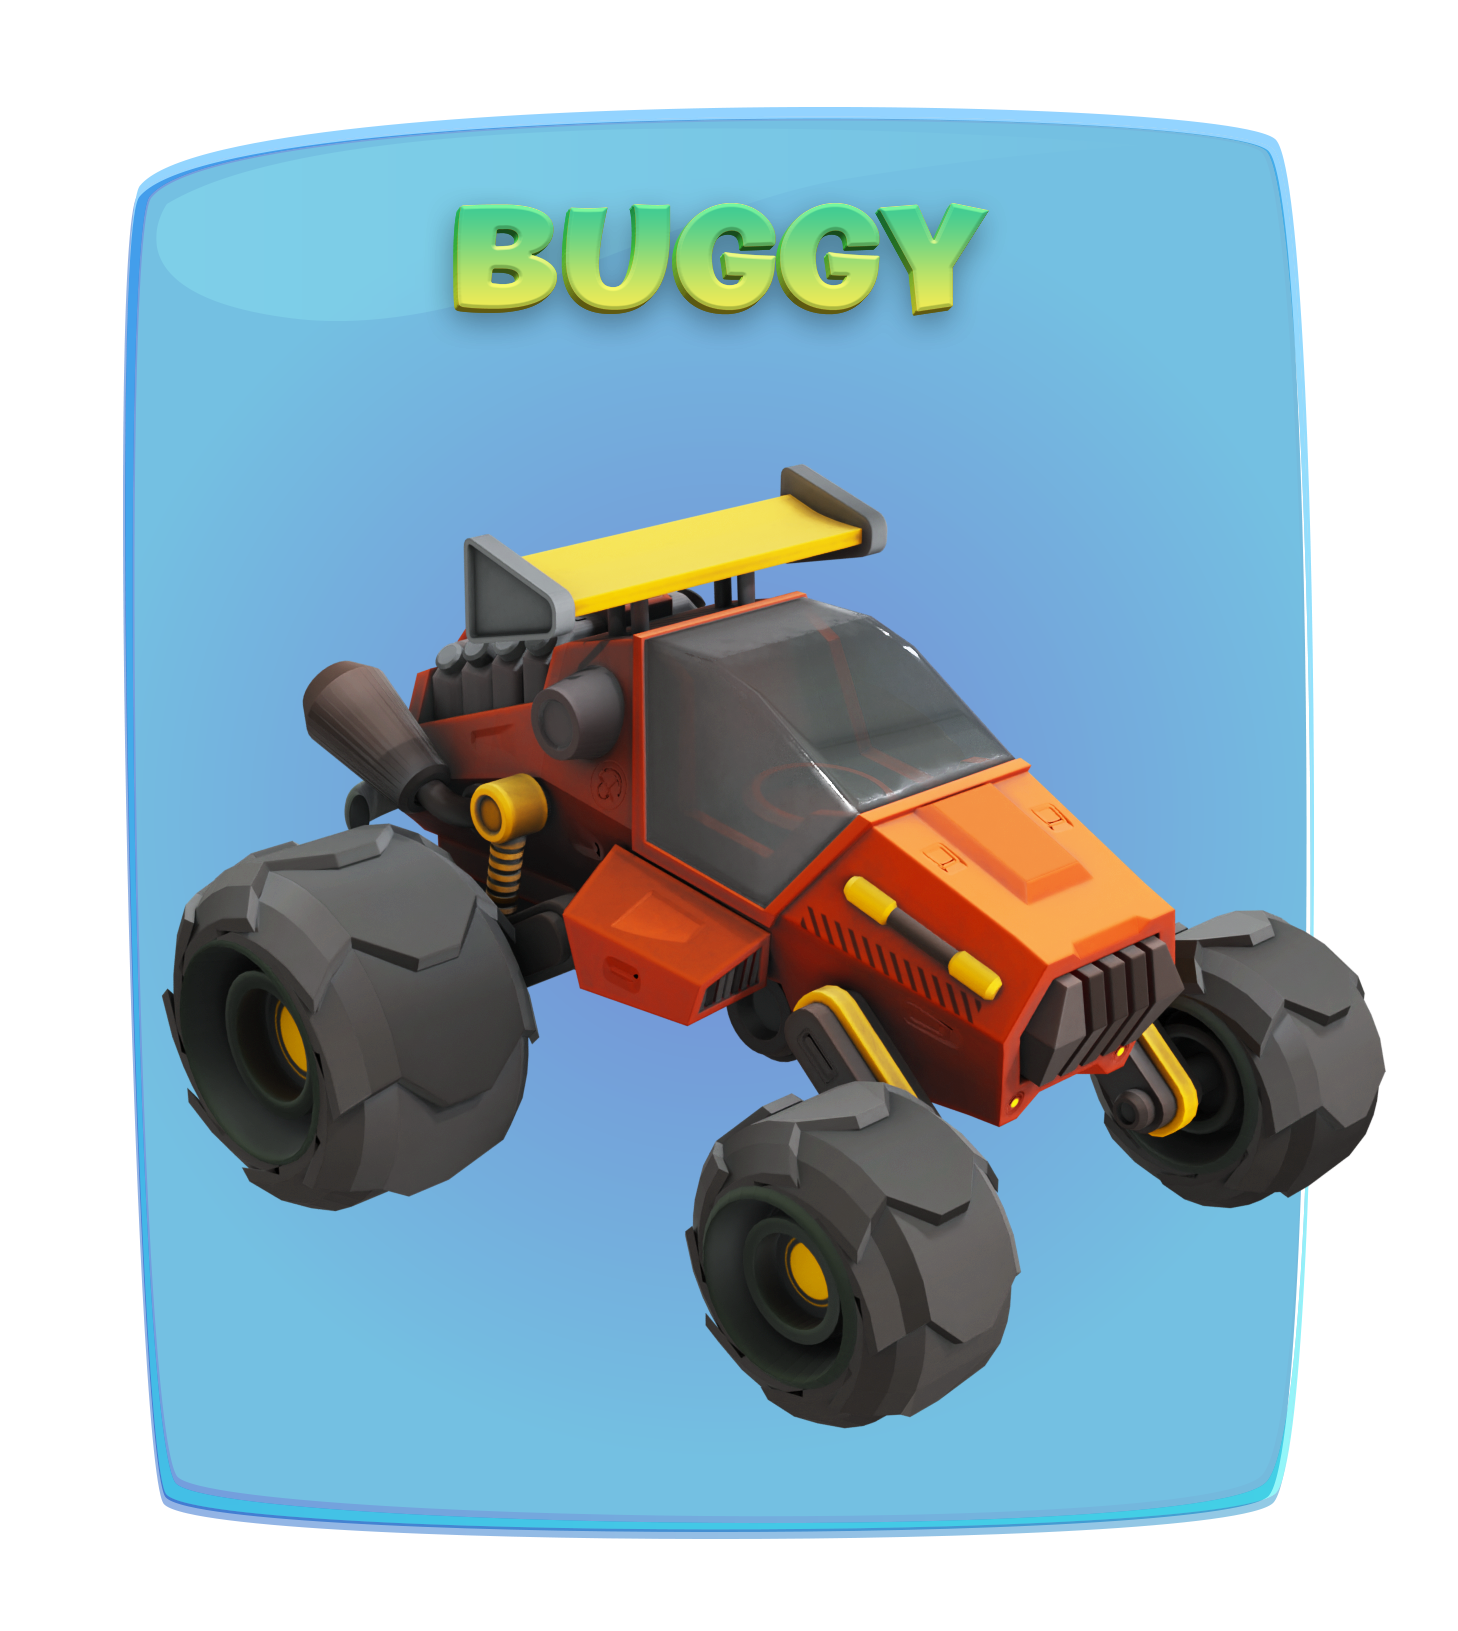 Buggy.png